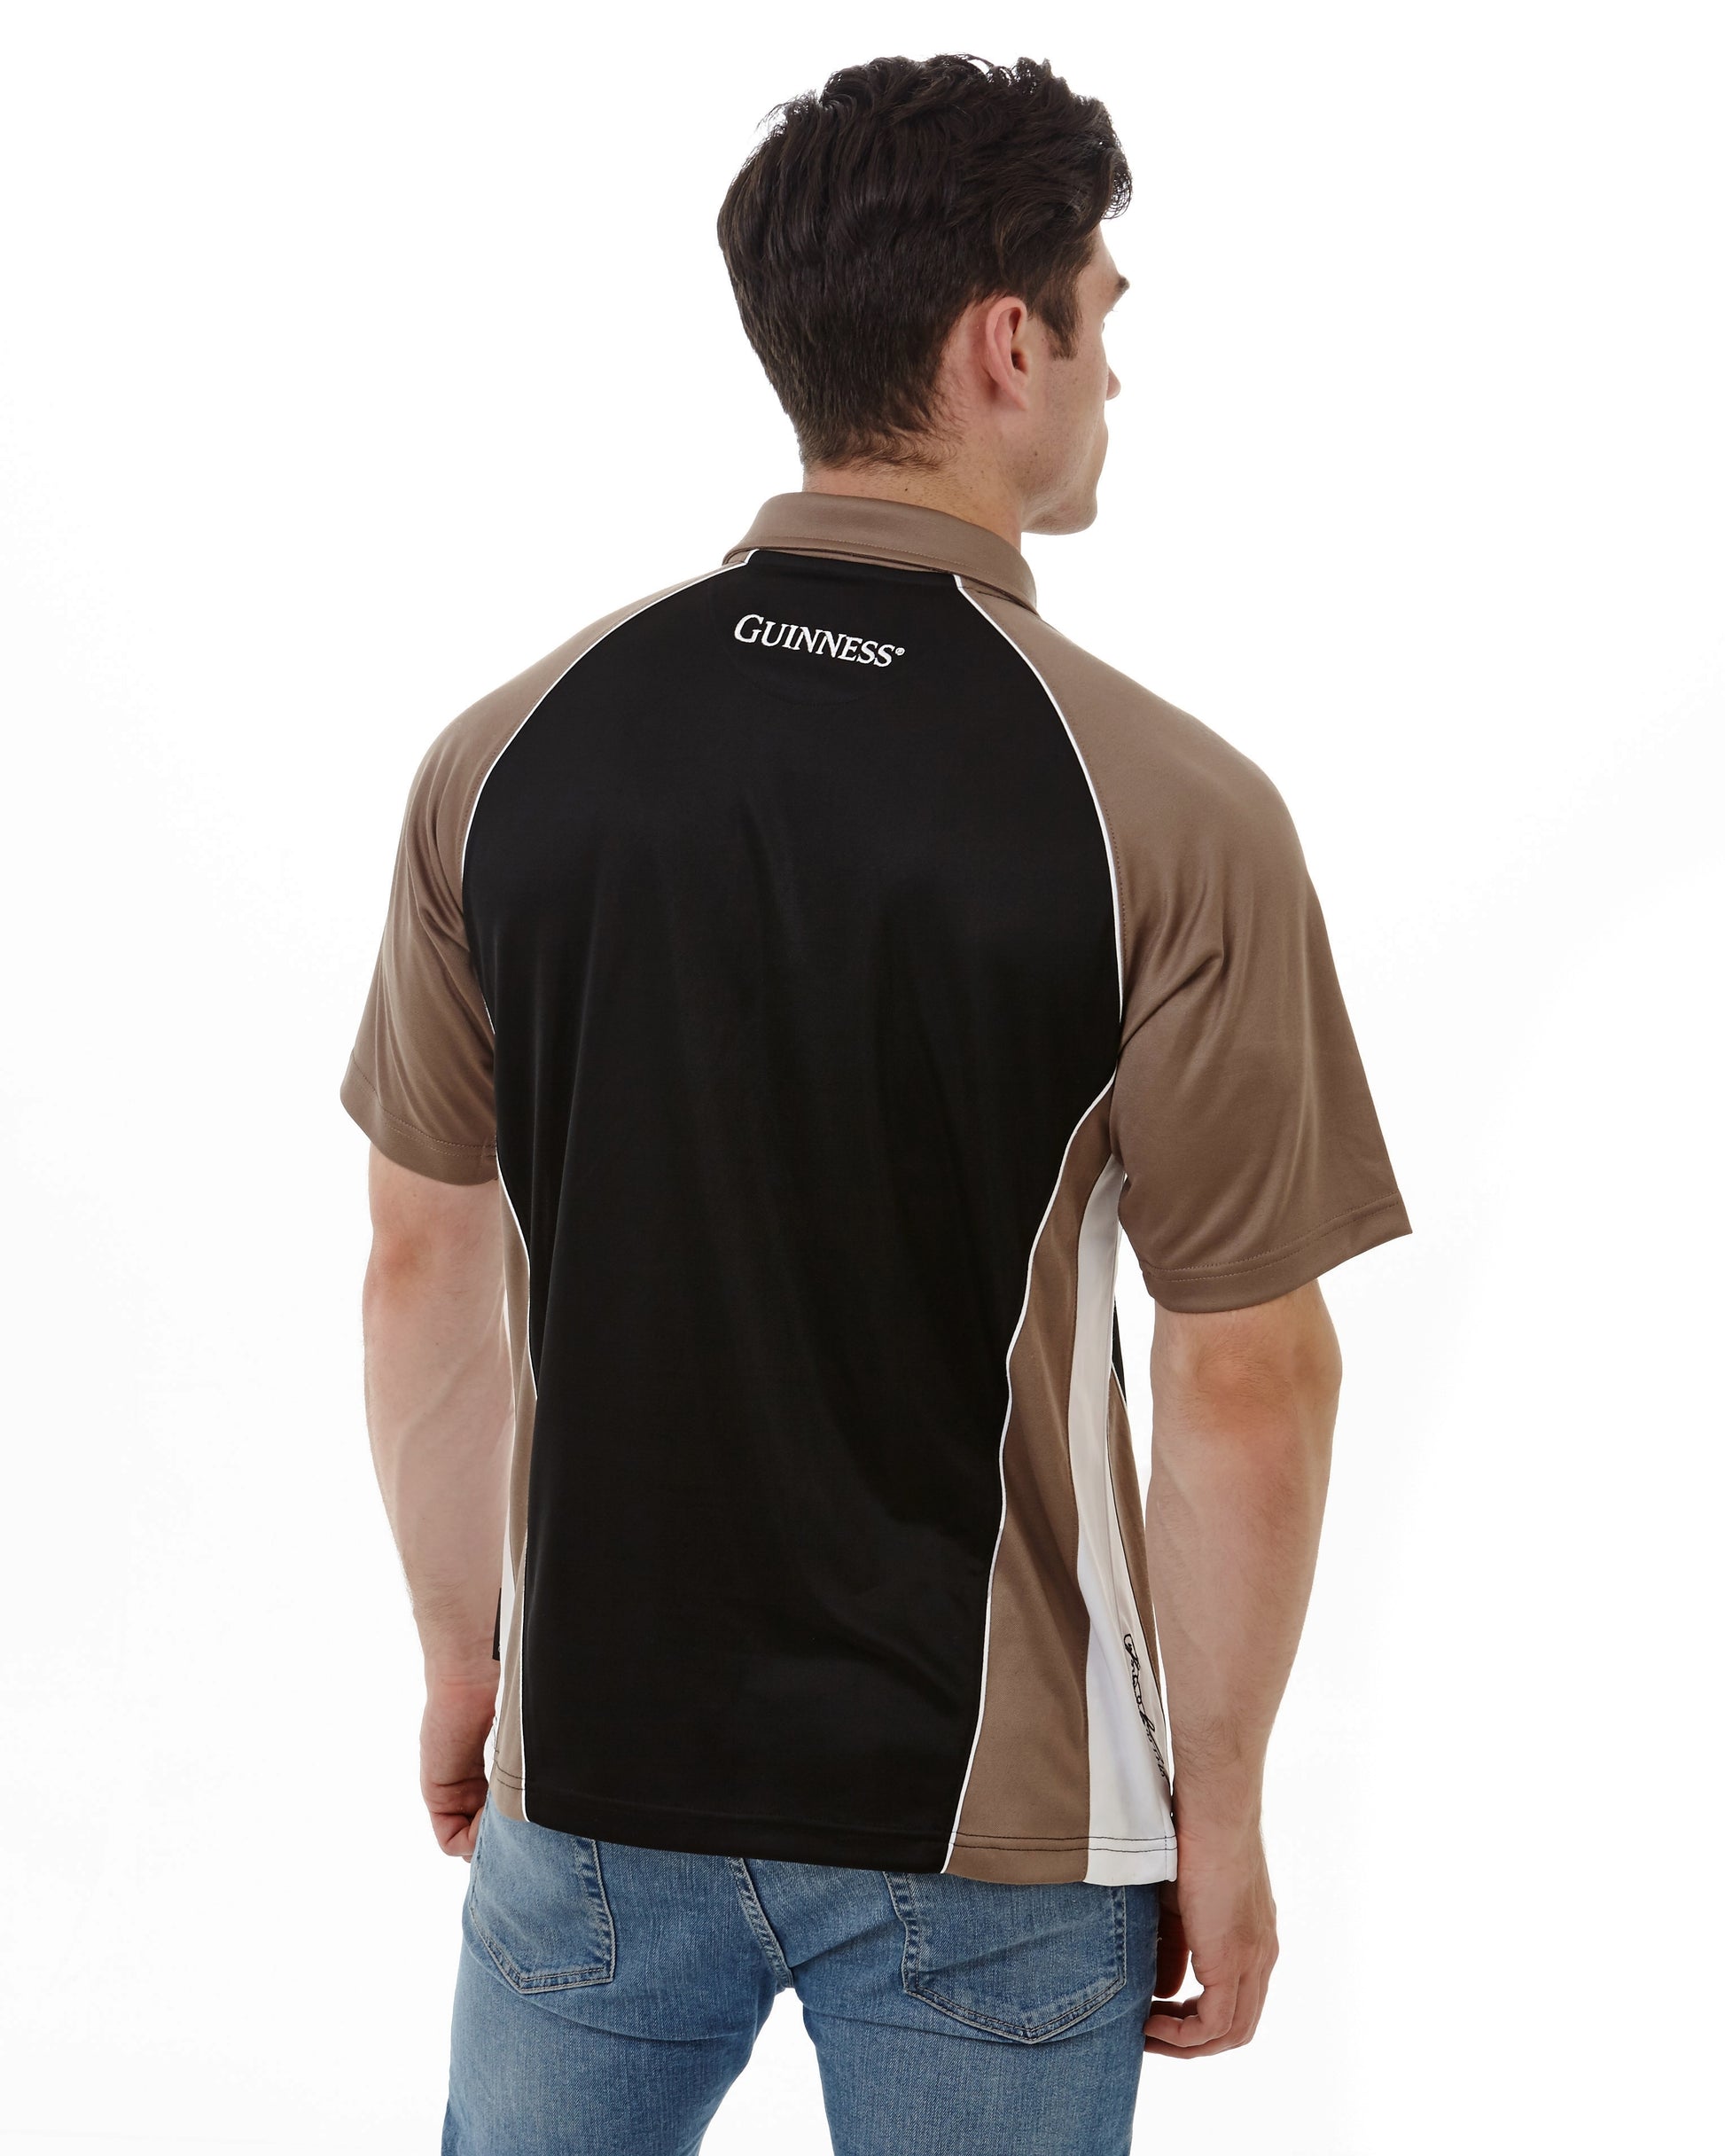 The back view of a man wearing a Guinness UK performance panelled golf shirt.